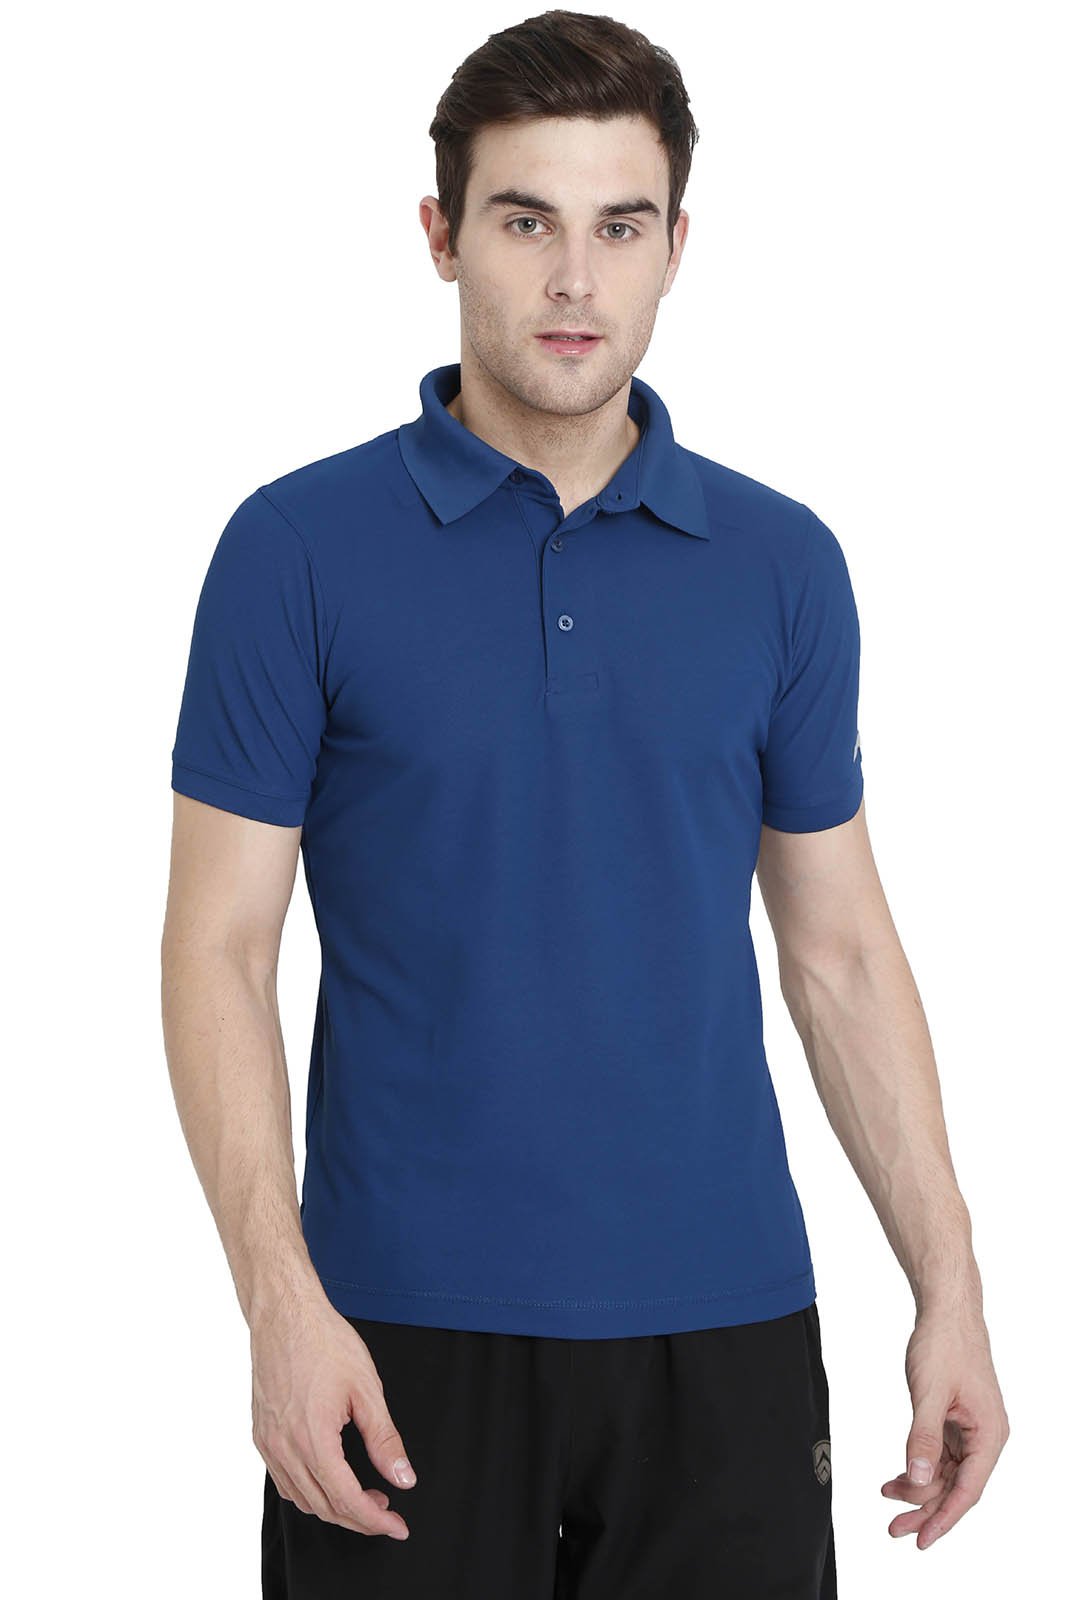 Buy Stormbase Blu Polo Online @ ₹699 from ShopClues